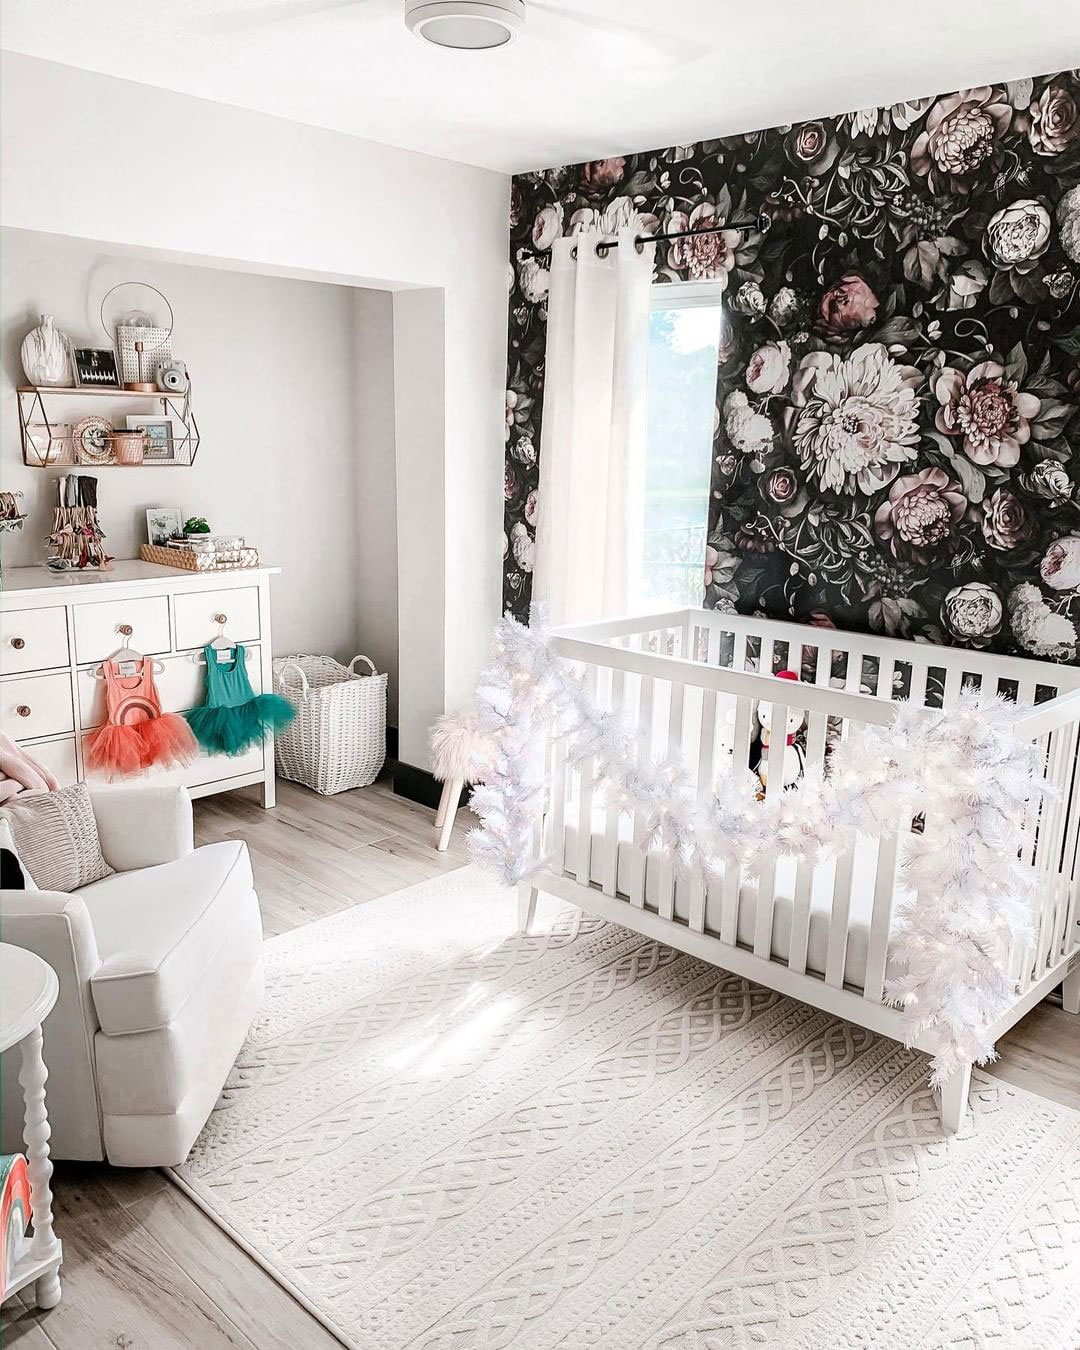 a gorgeous kid's nursery with a refined black realistic floral print wall that stands out in a white space